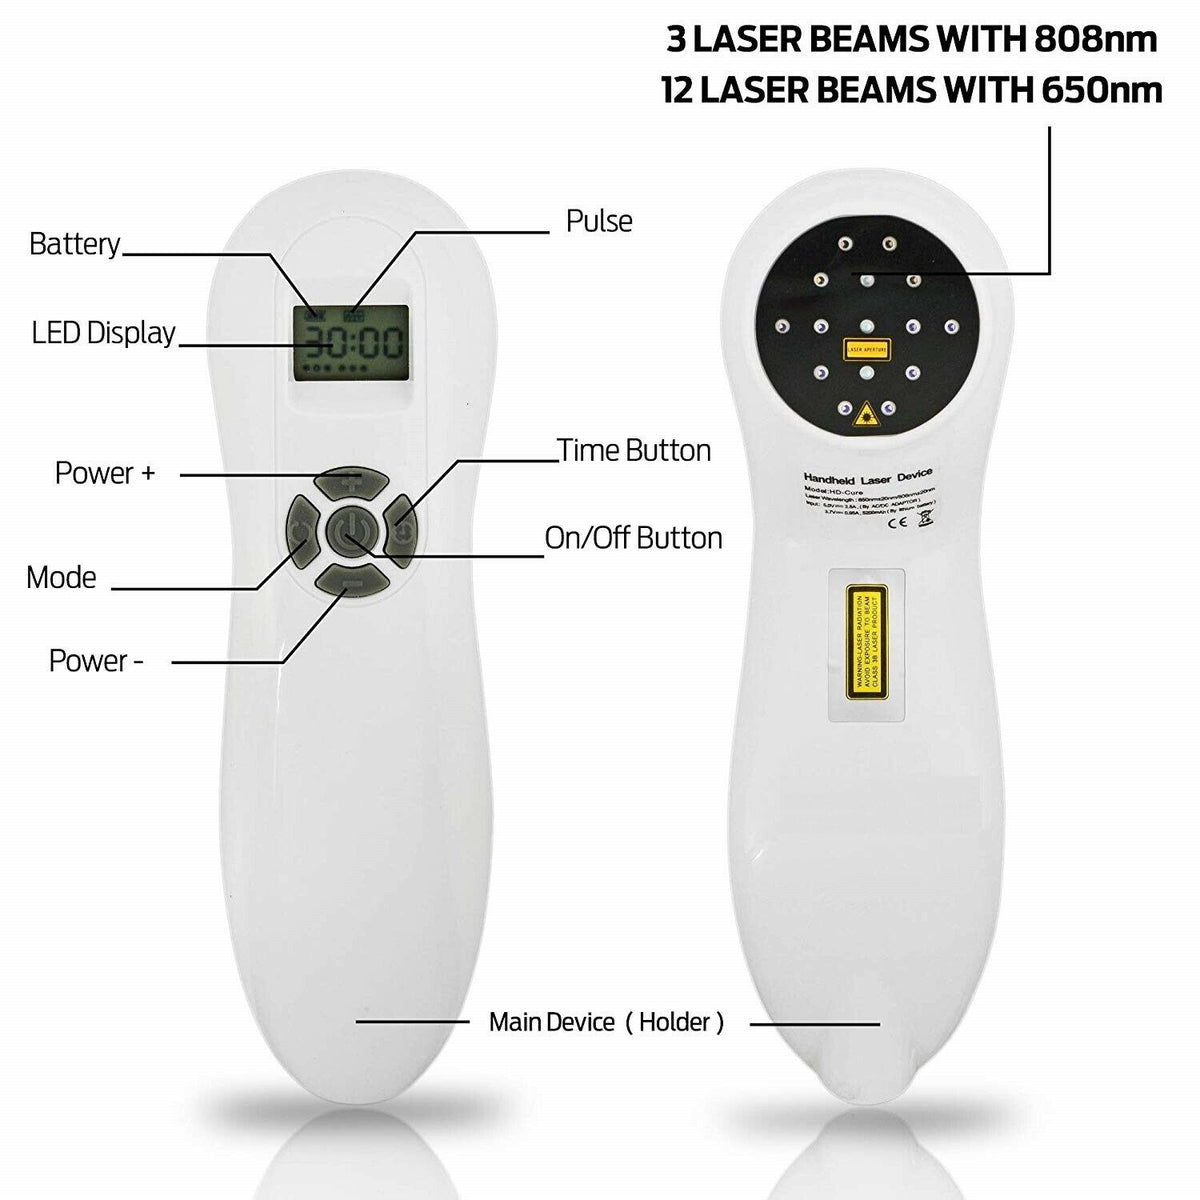 hd-max-cold-laser-therapy-device